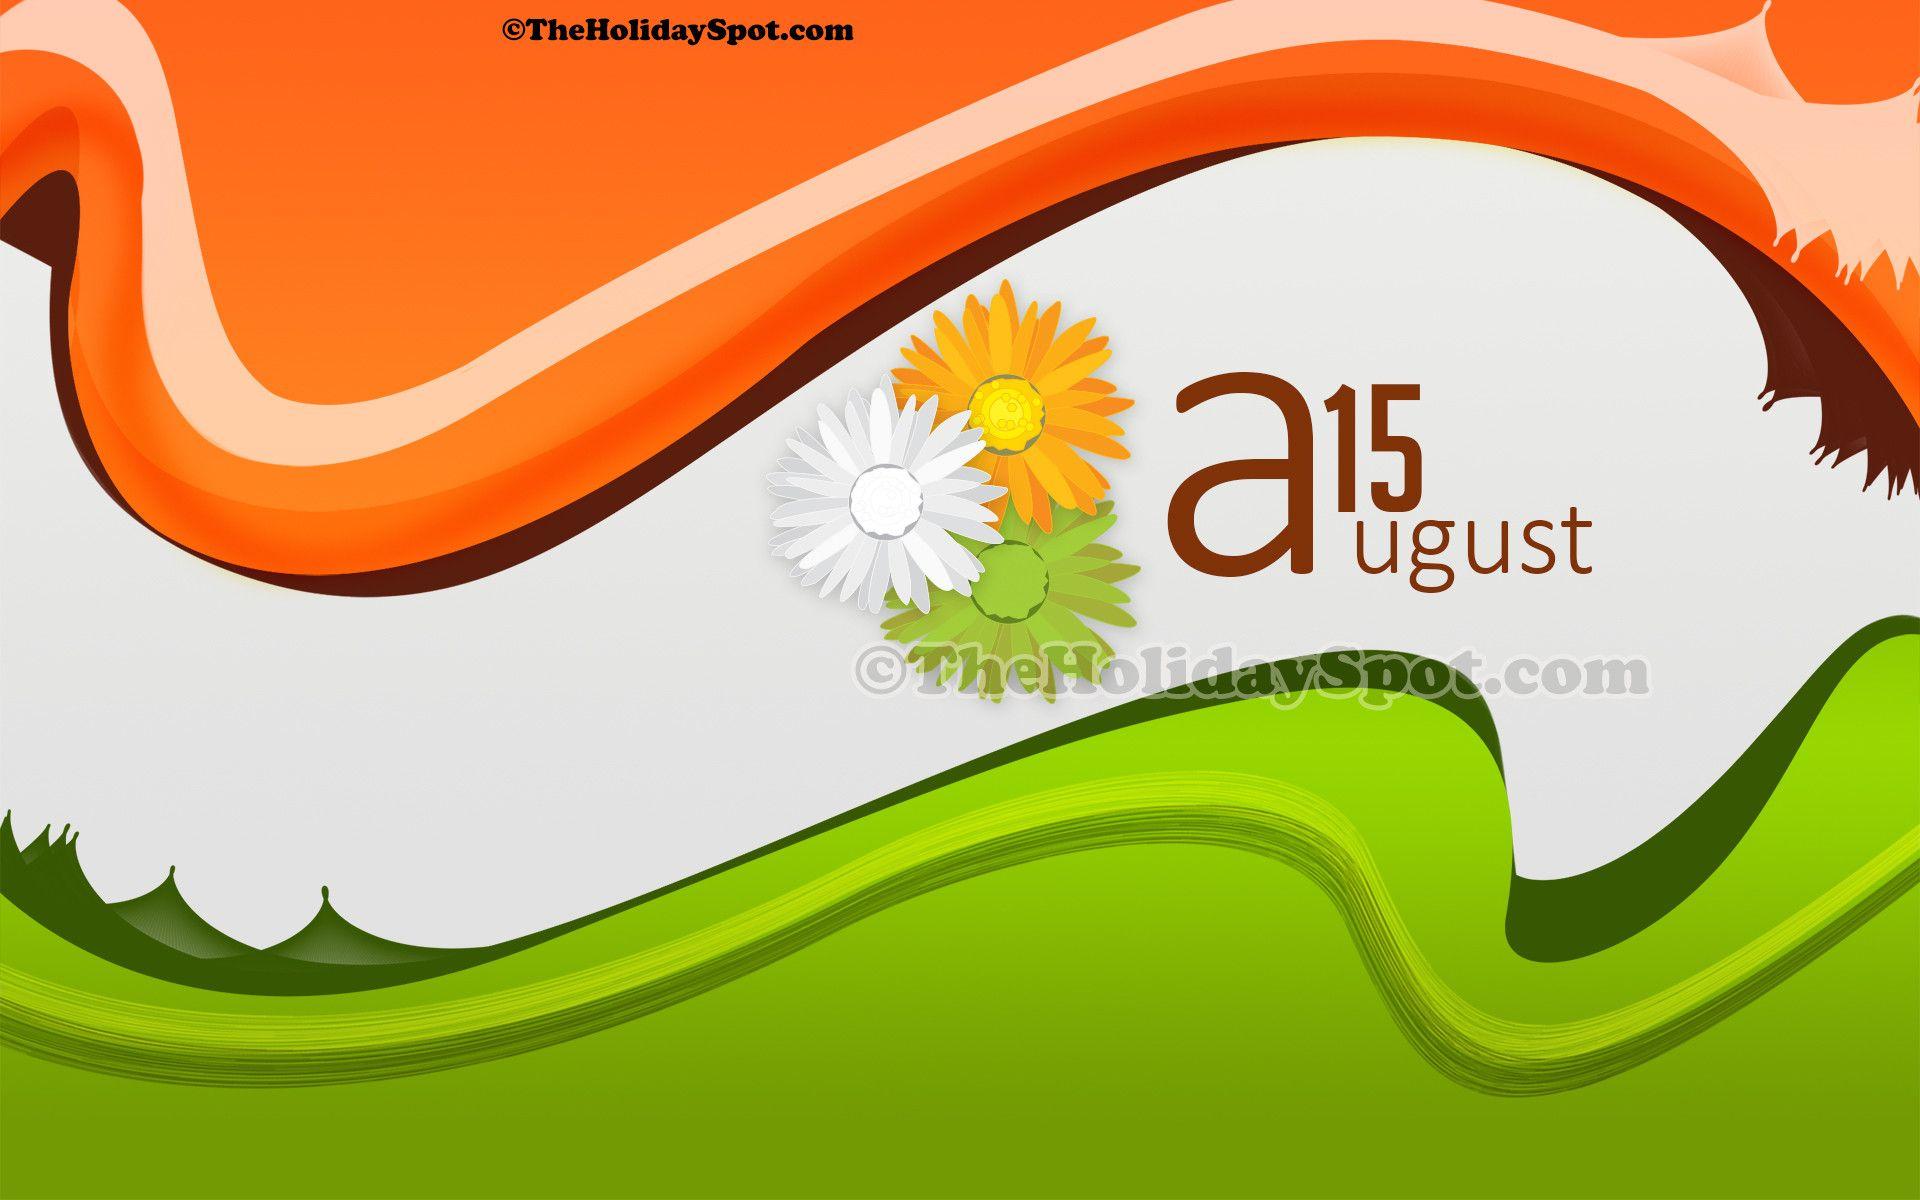 15th August (Indian Independence Day) Wallpaper